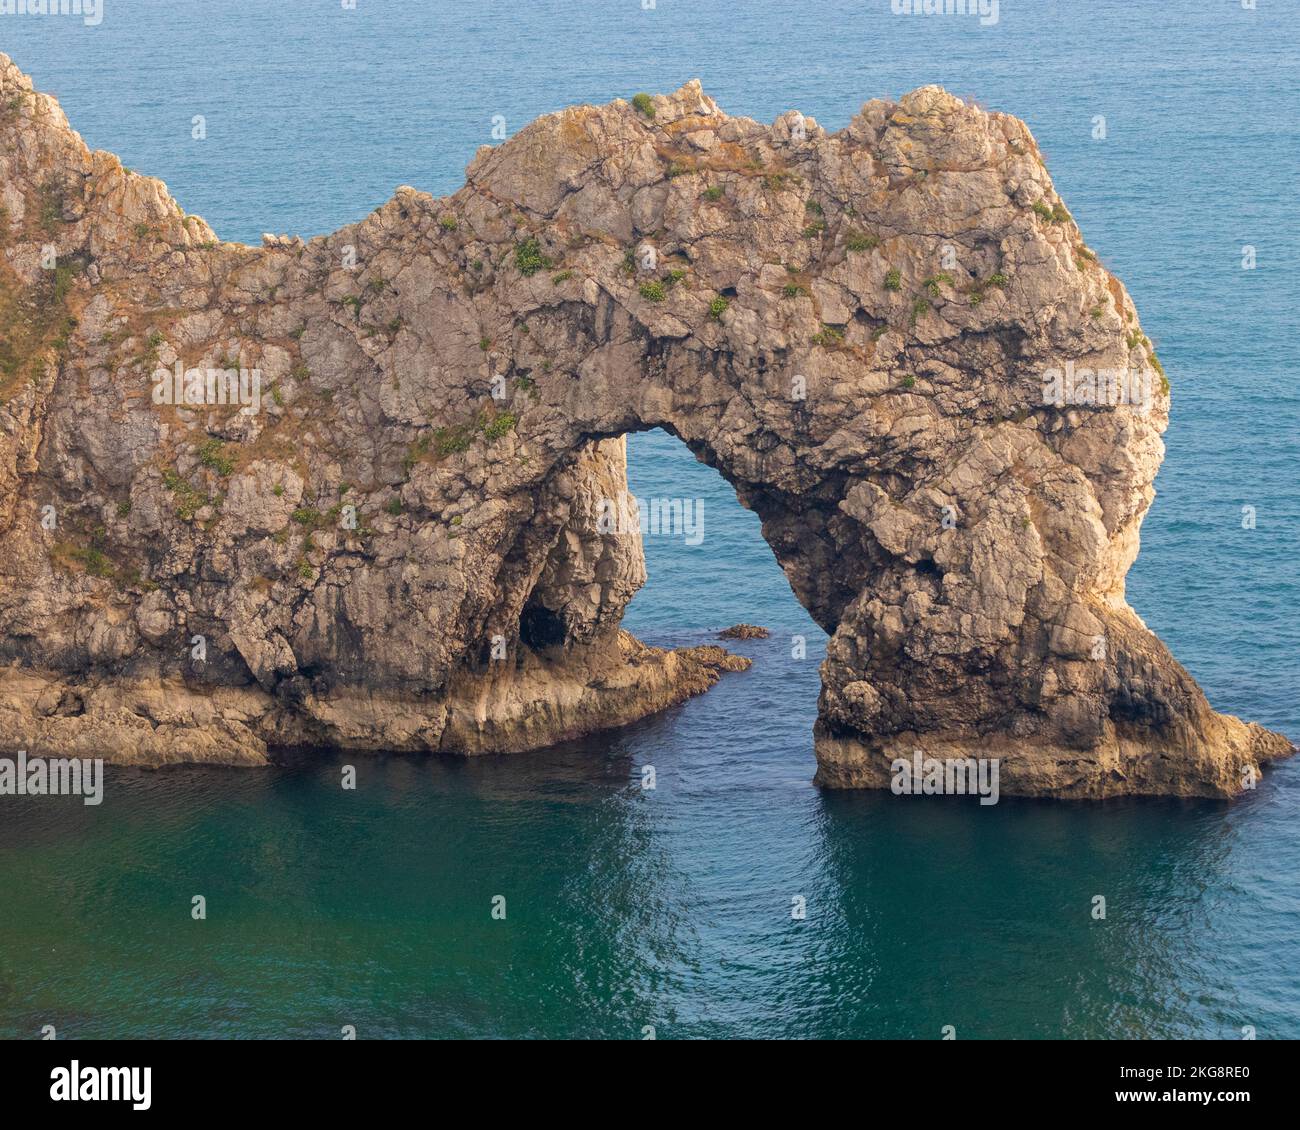 Durdle Door under an overcast sky on the south coast of the uk showing the English Channel. Stock Photo